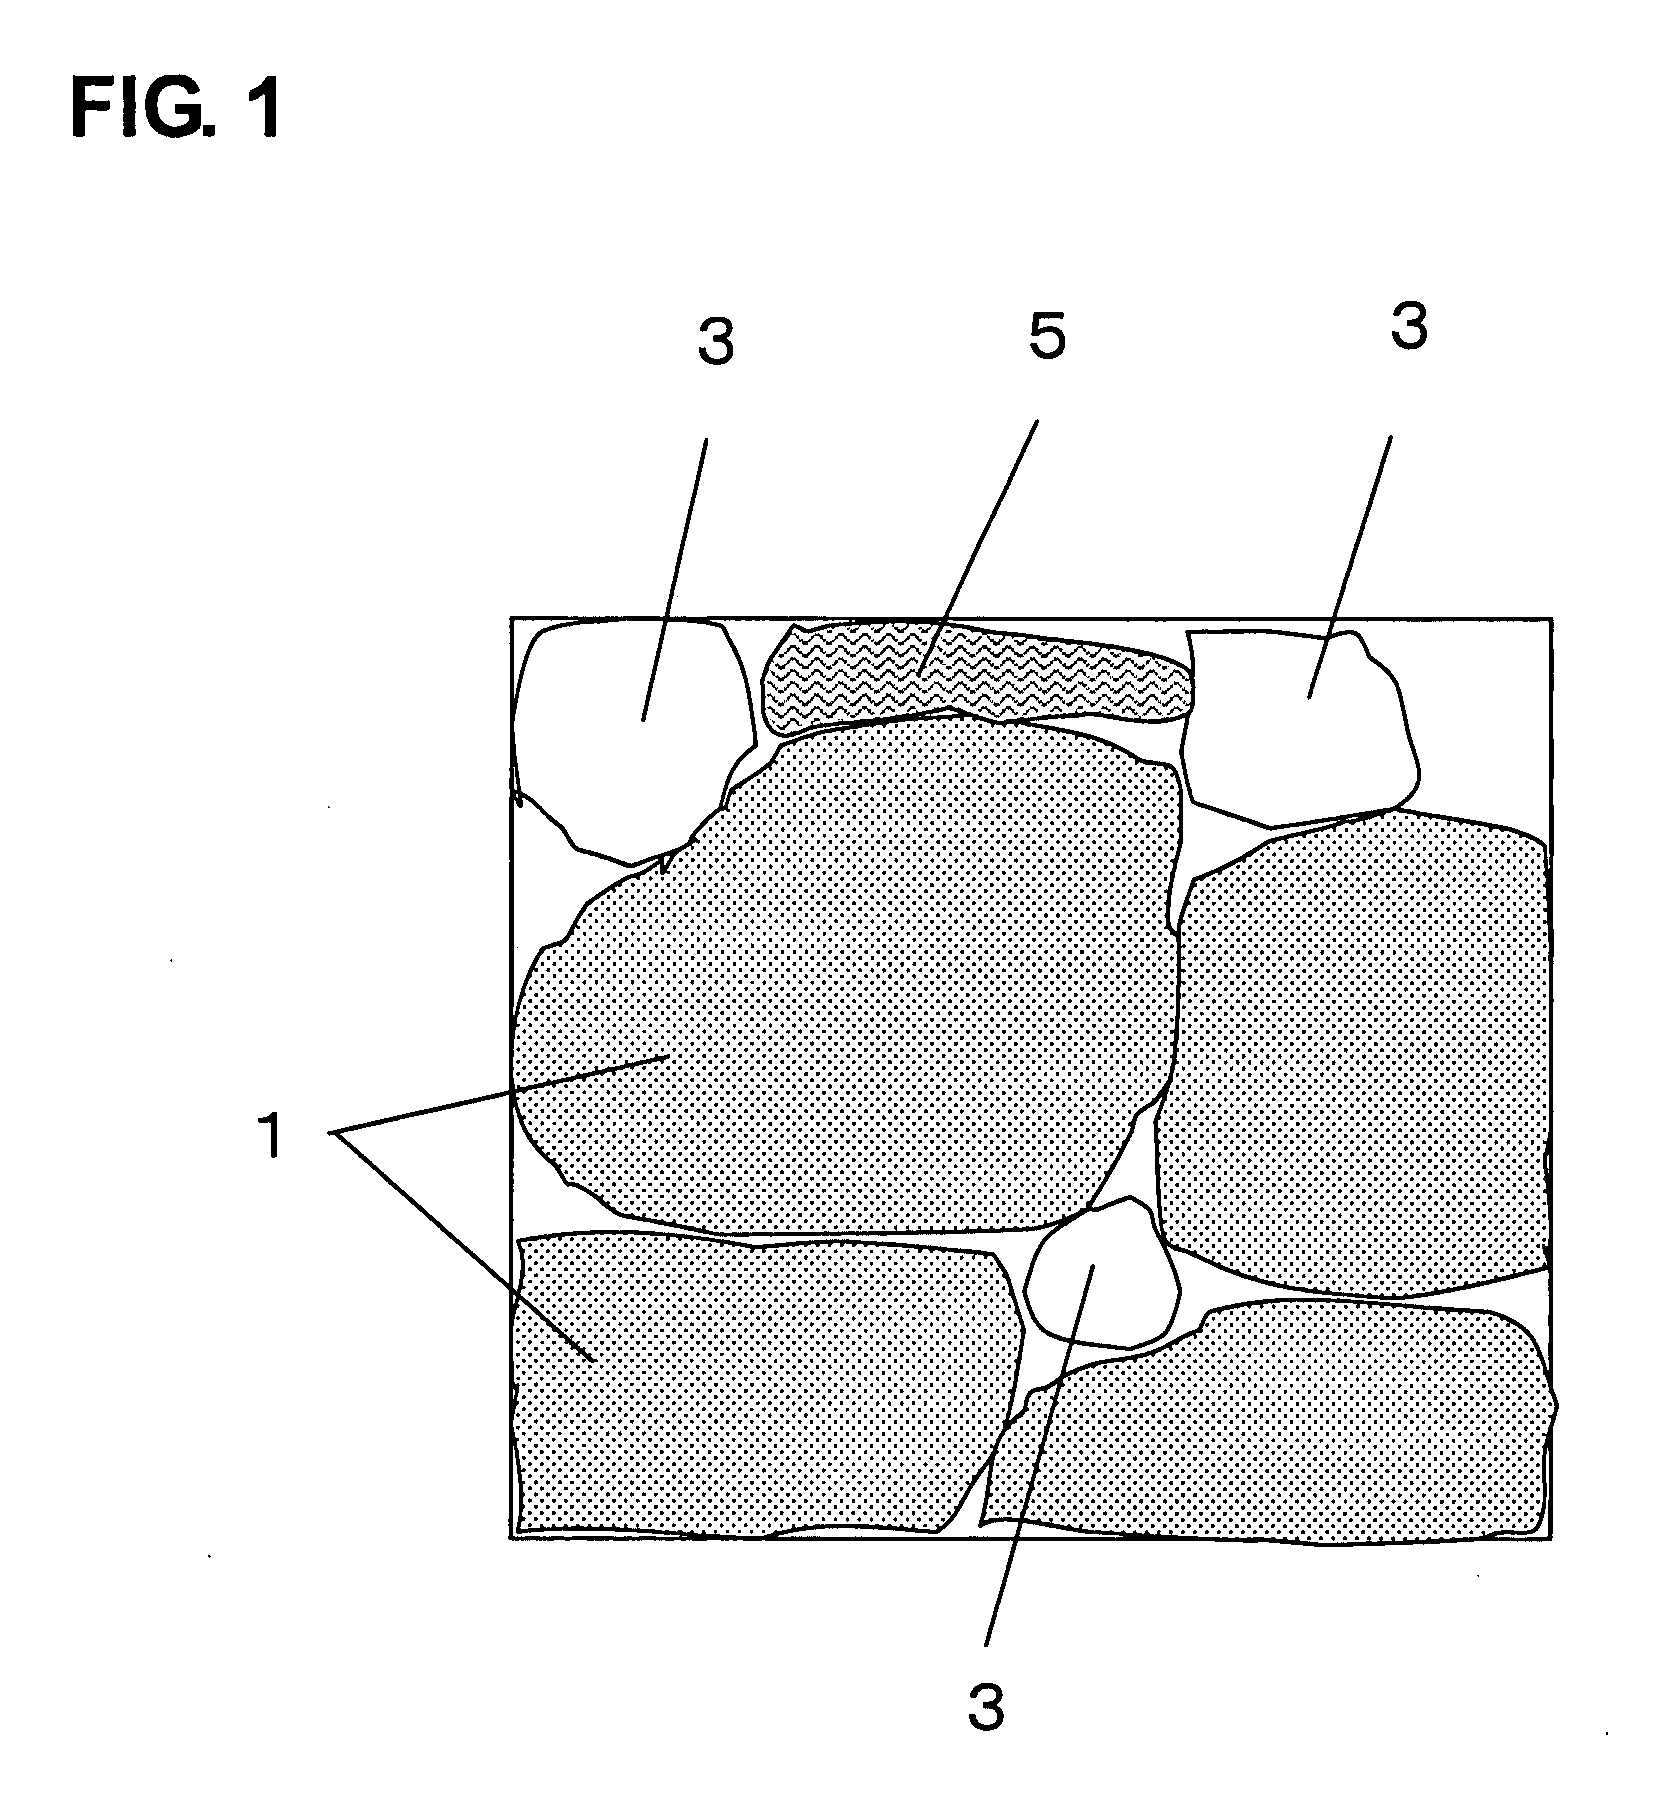 Composite Ceramic and Method for Making the Same